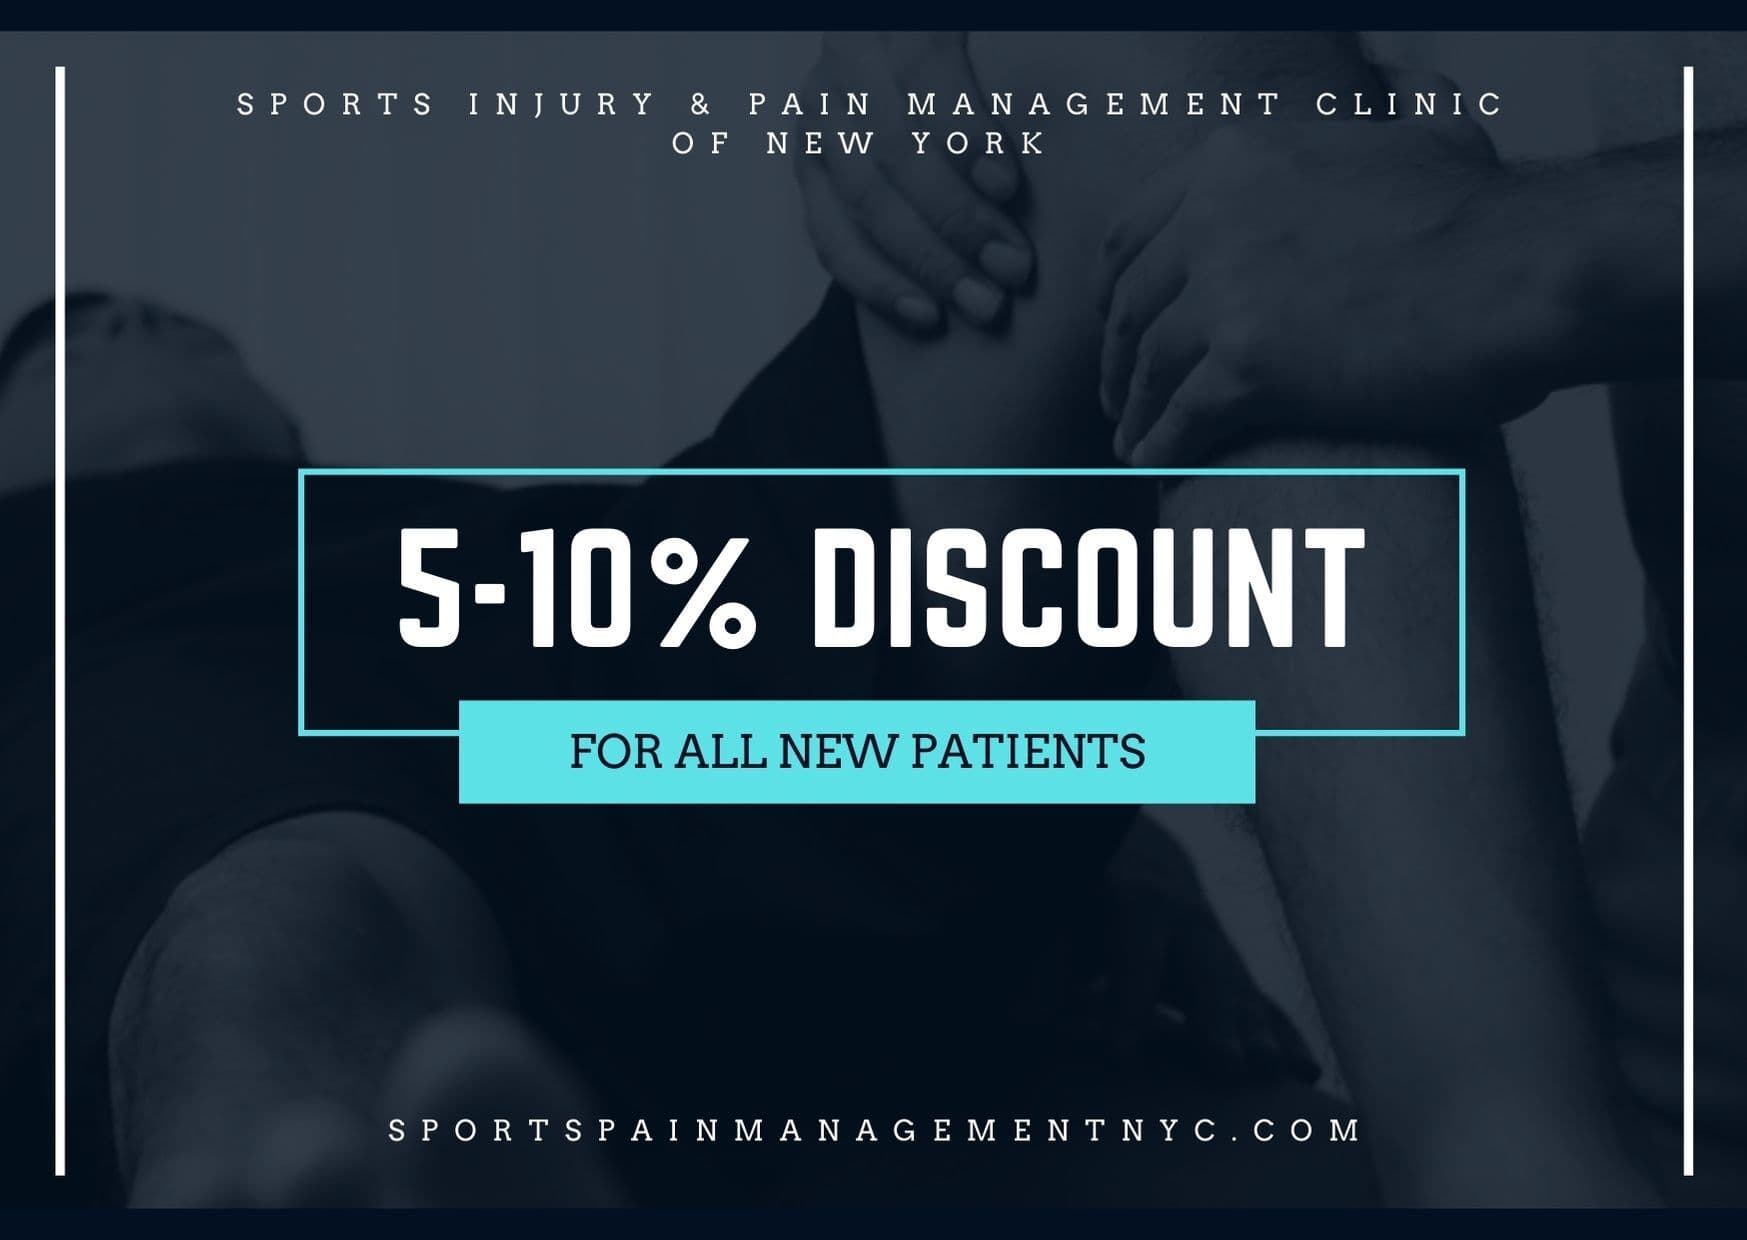 Sports Injury & Pain Management Clinic of New York, US, sports injury clinic